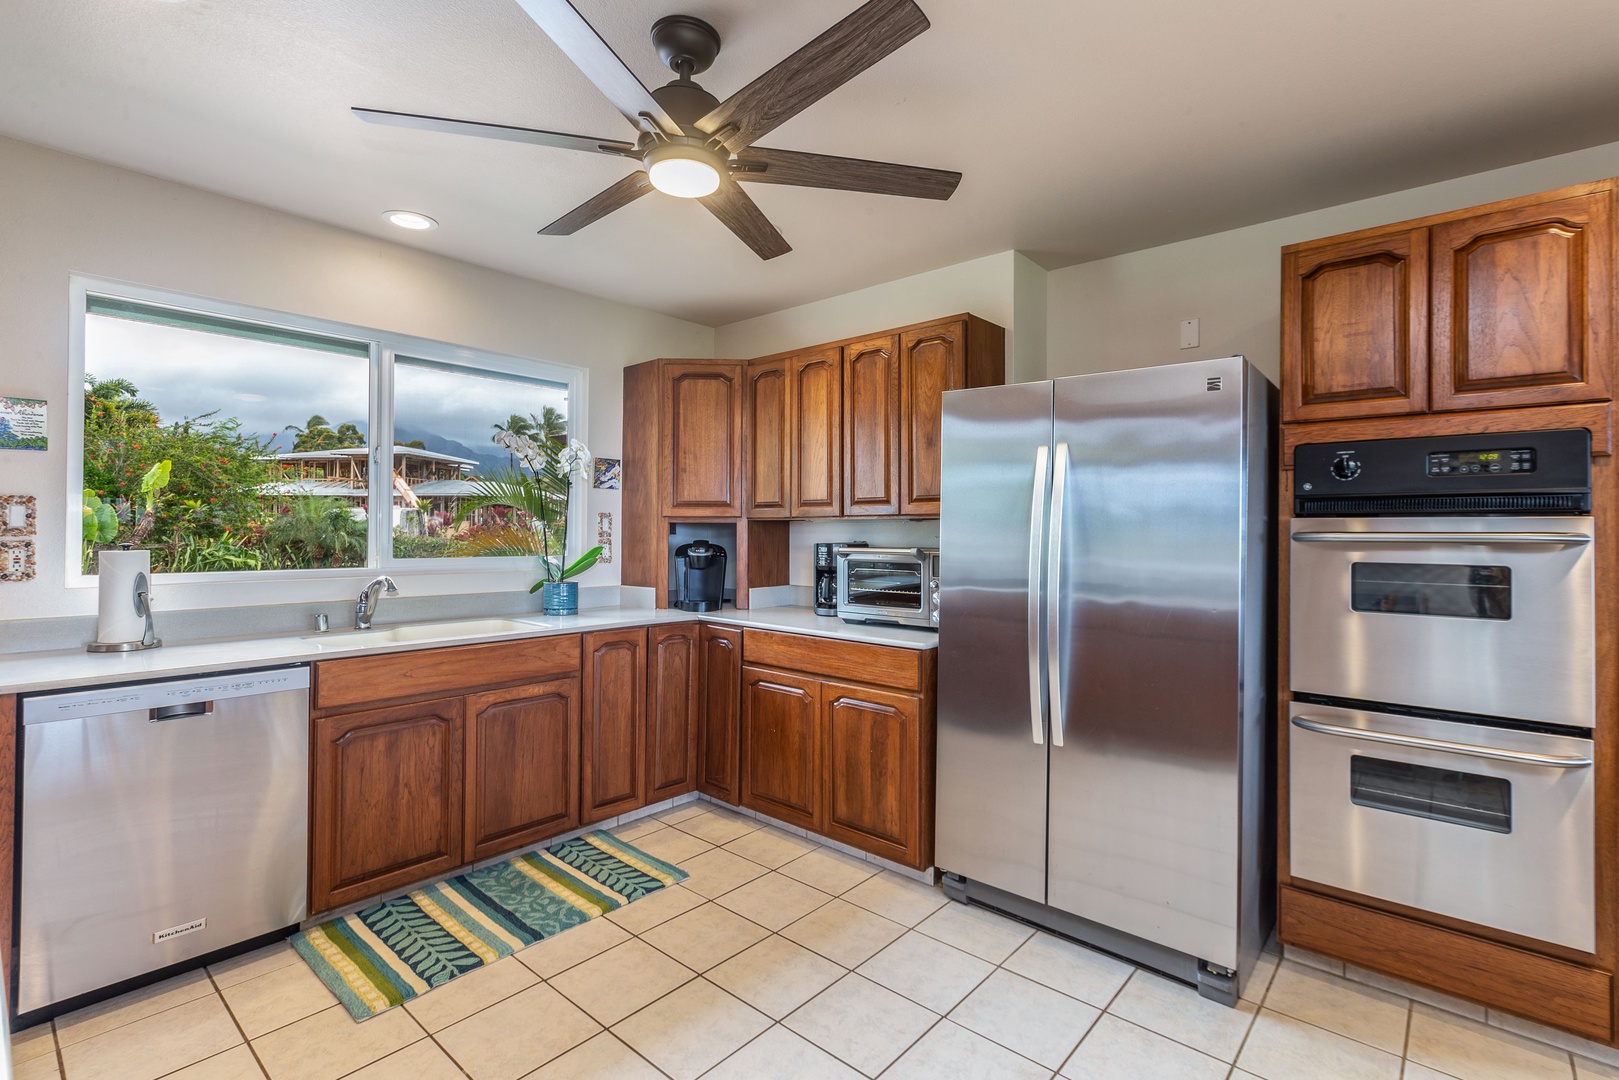 Princeville Vacation Rentals, Hale Ohia - The spacious kitchen offers the perfect space to cook a delicious meal